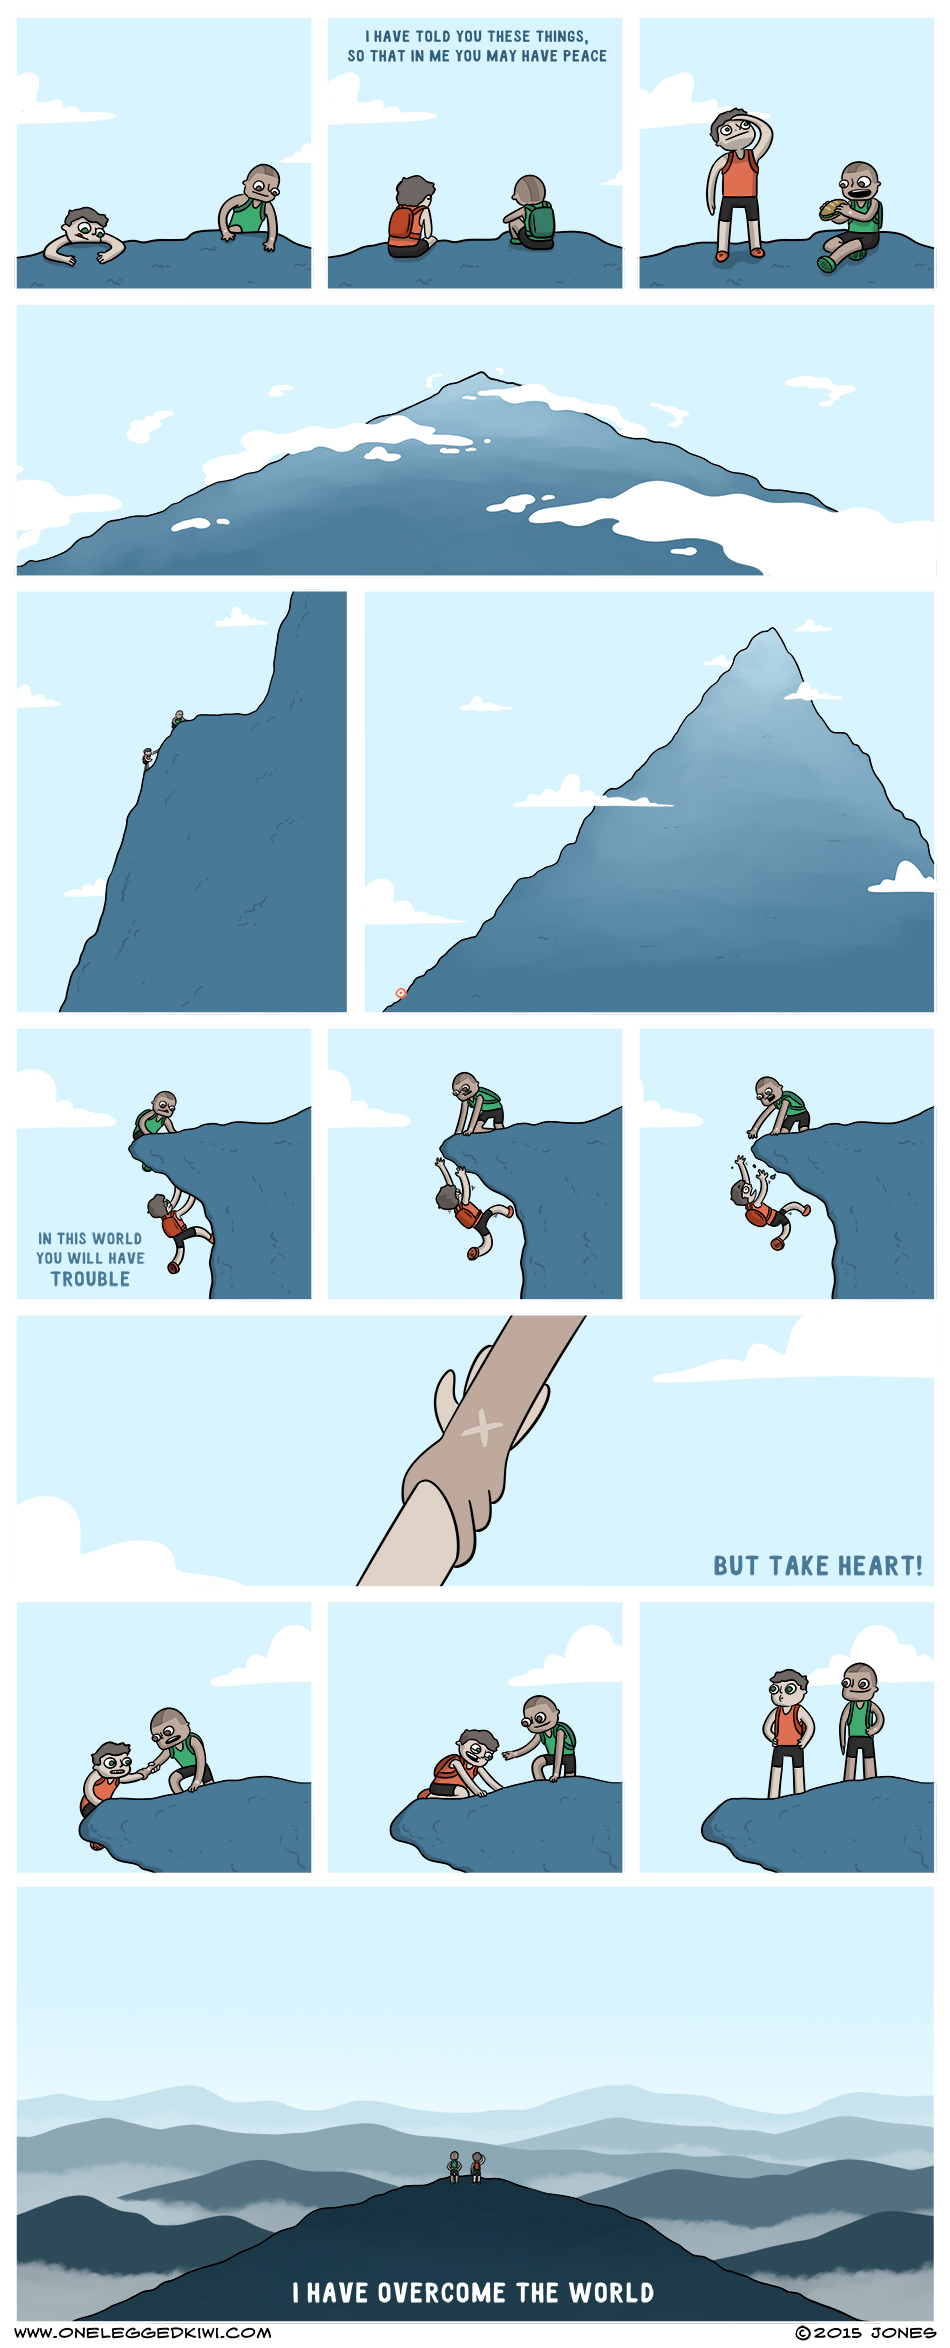 I have overcome the world - an illustration by Anchor Lines, a Christian Webcomic